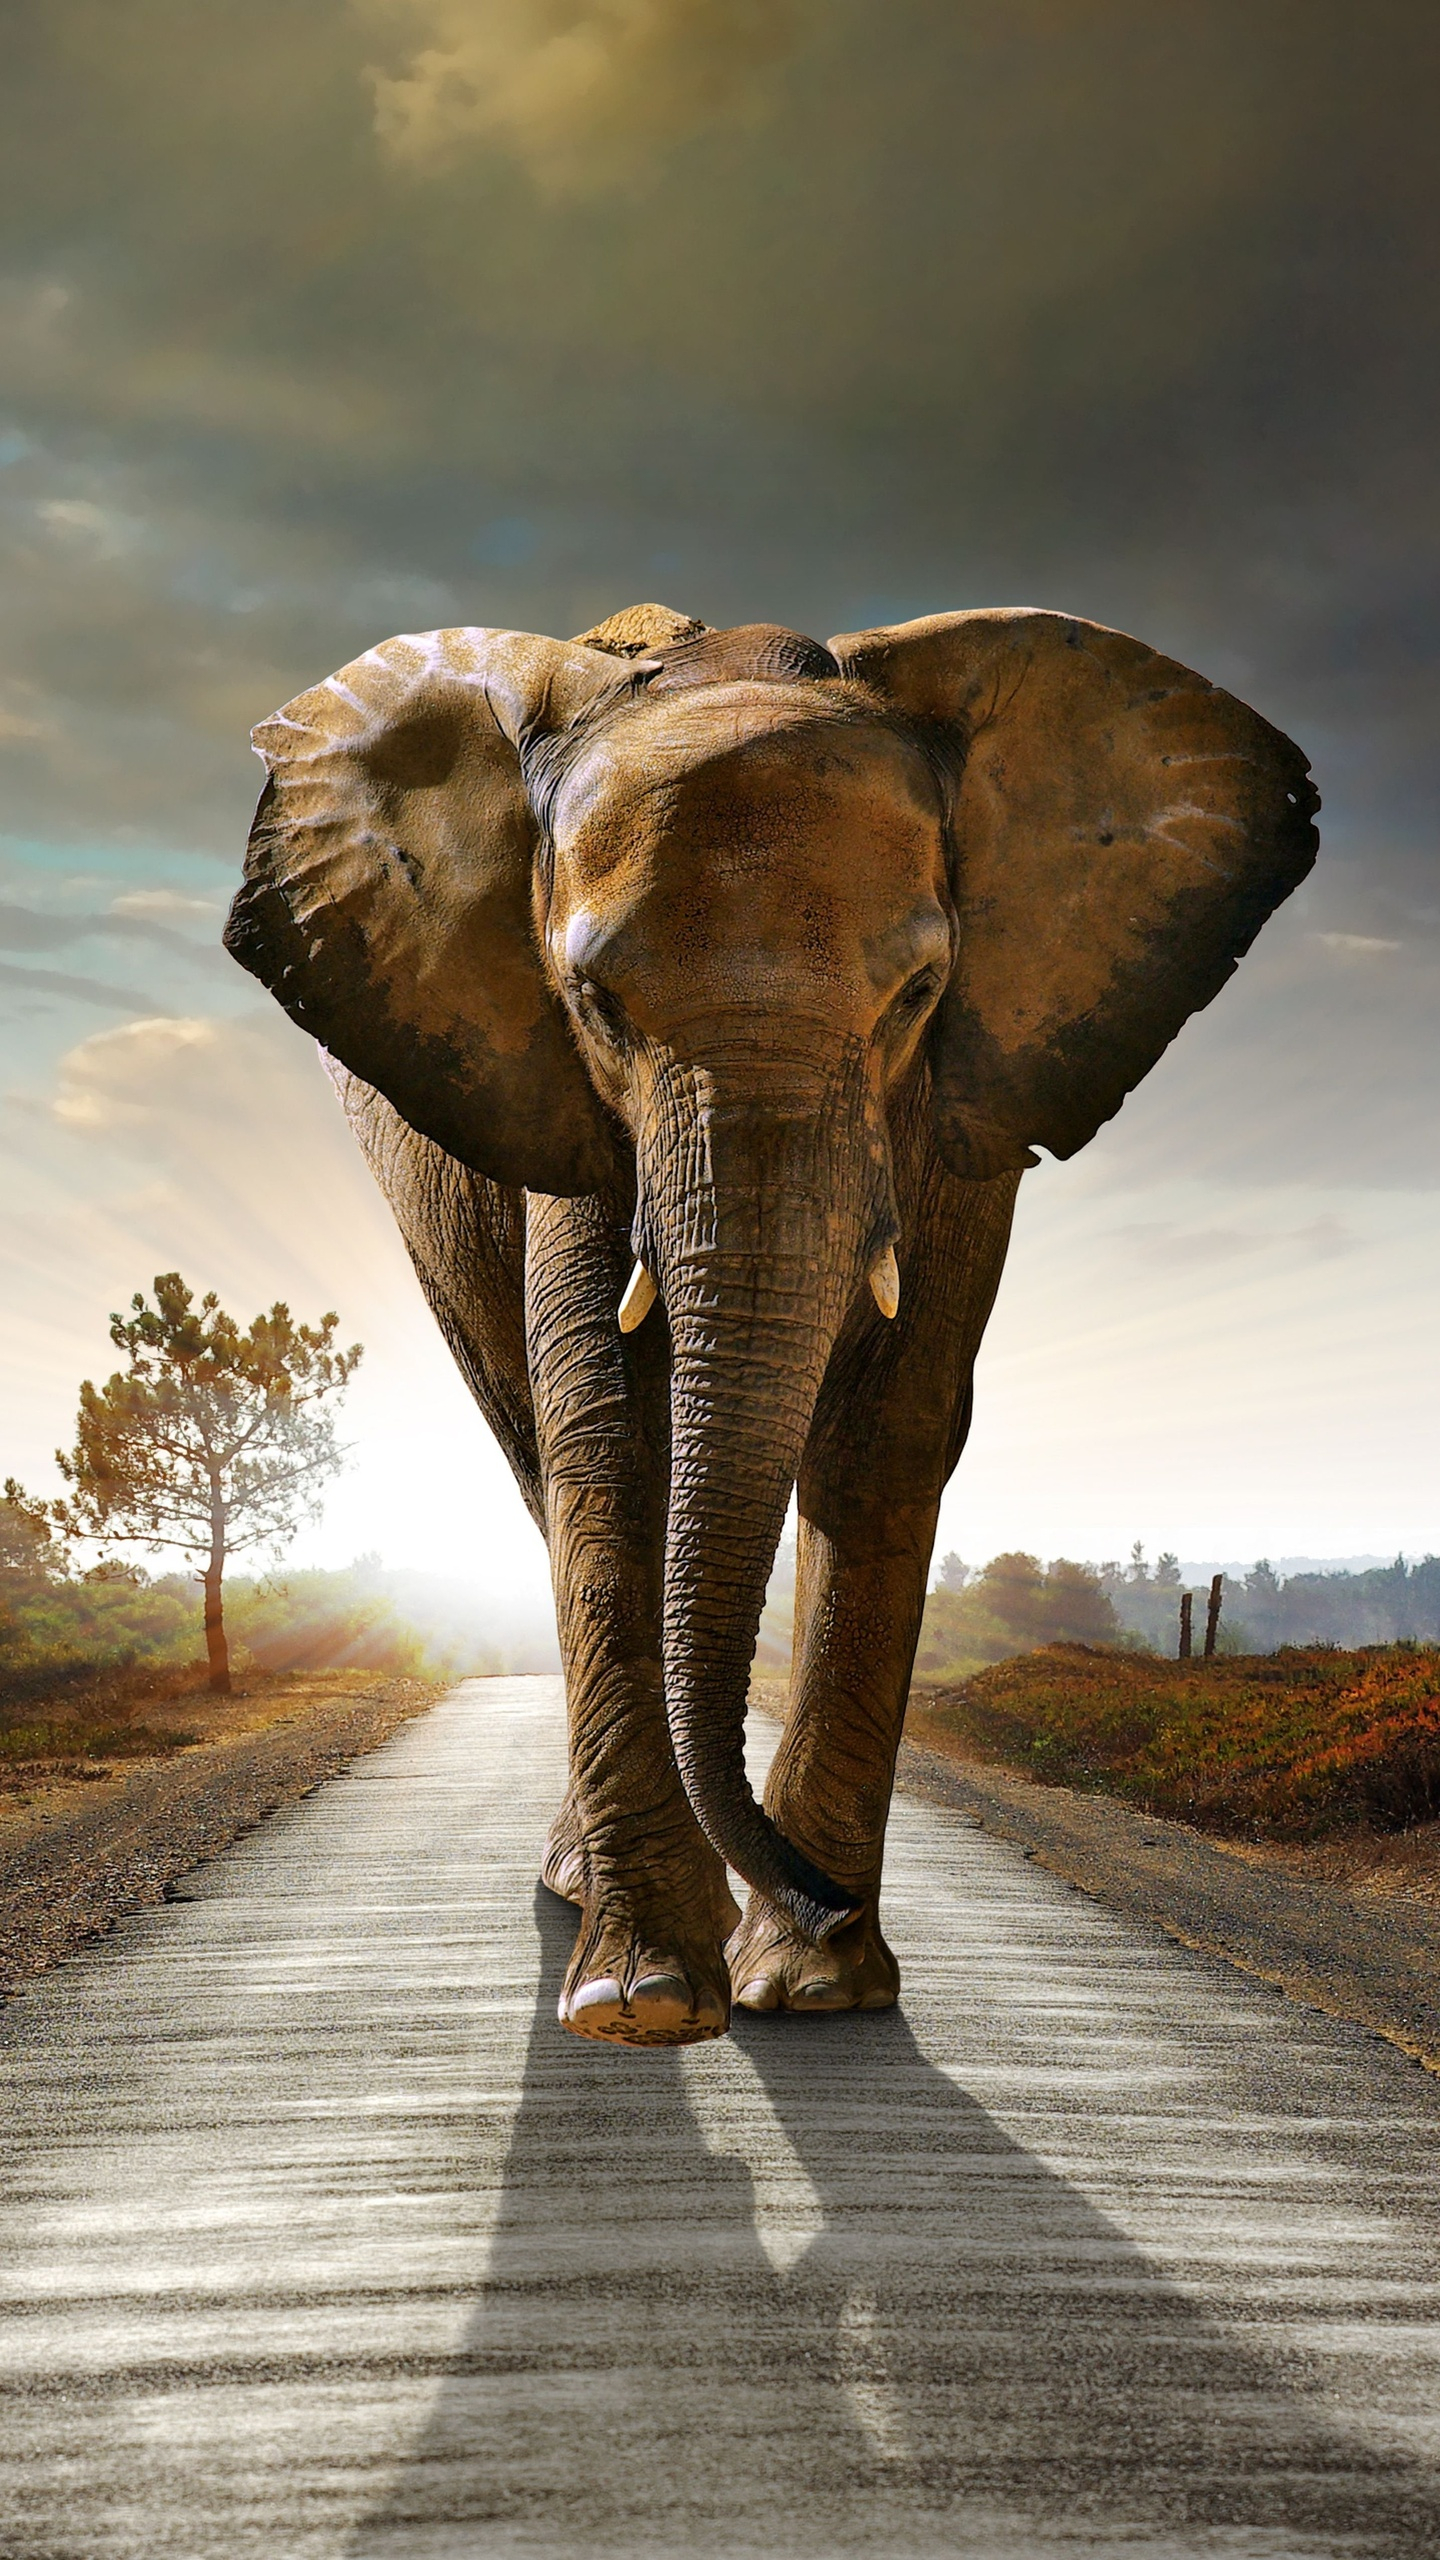 1440x2560 Elephant Walking On The Road Hdr 8k Samsung Galaxy S6,S7 ,Google Pixel XL ,Nexus 6,6P ,LG G5 HD 4k Wallpapers, Images, Backgrounds, Photos and Pictures